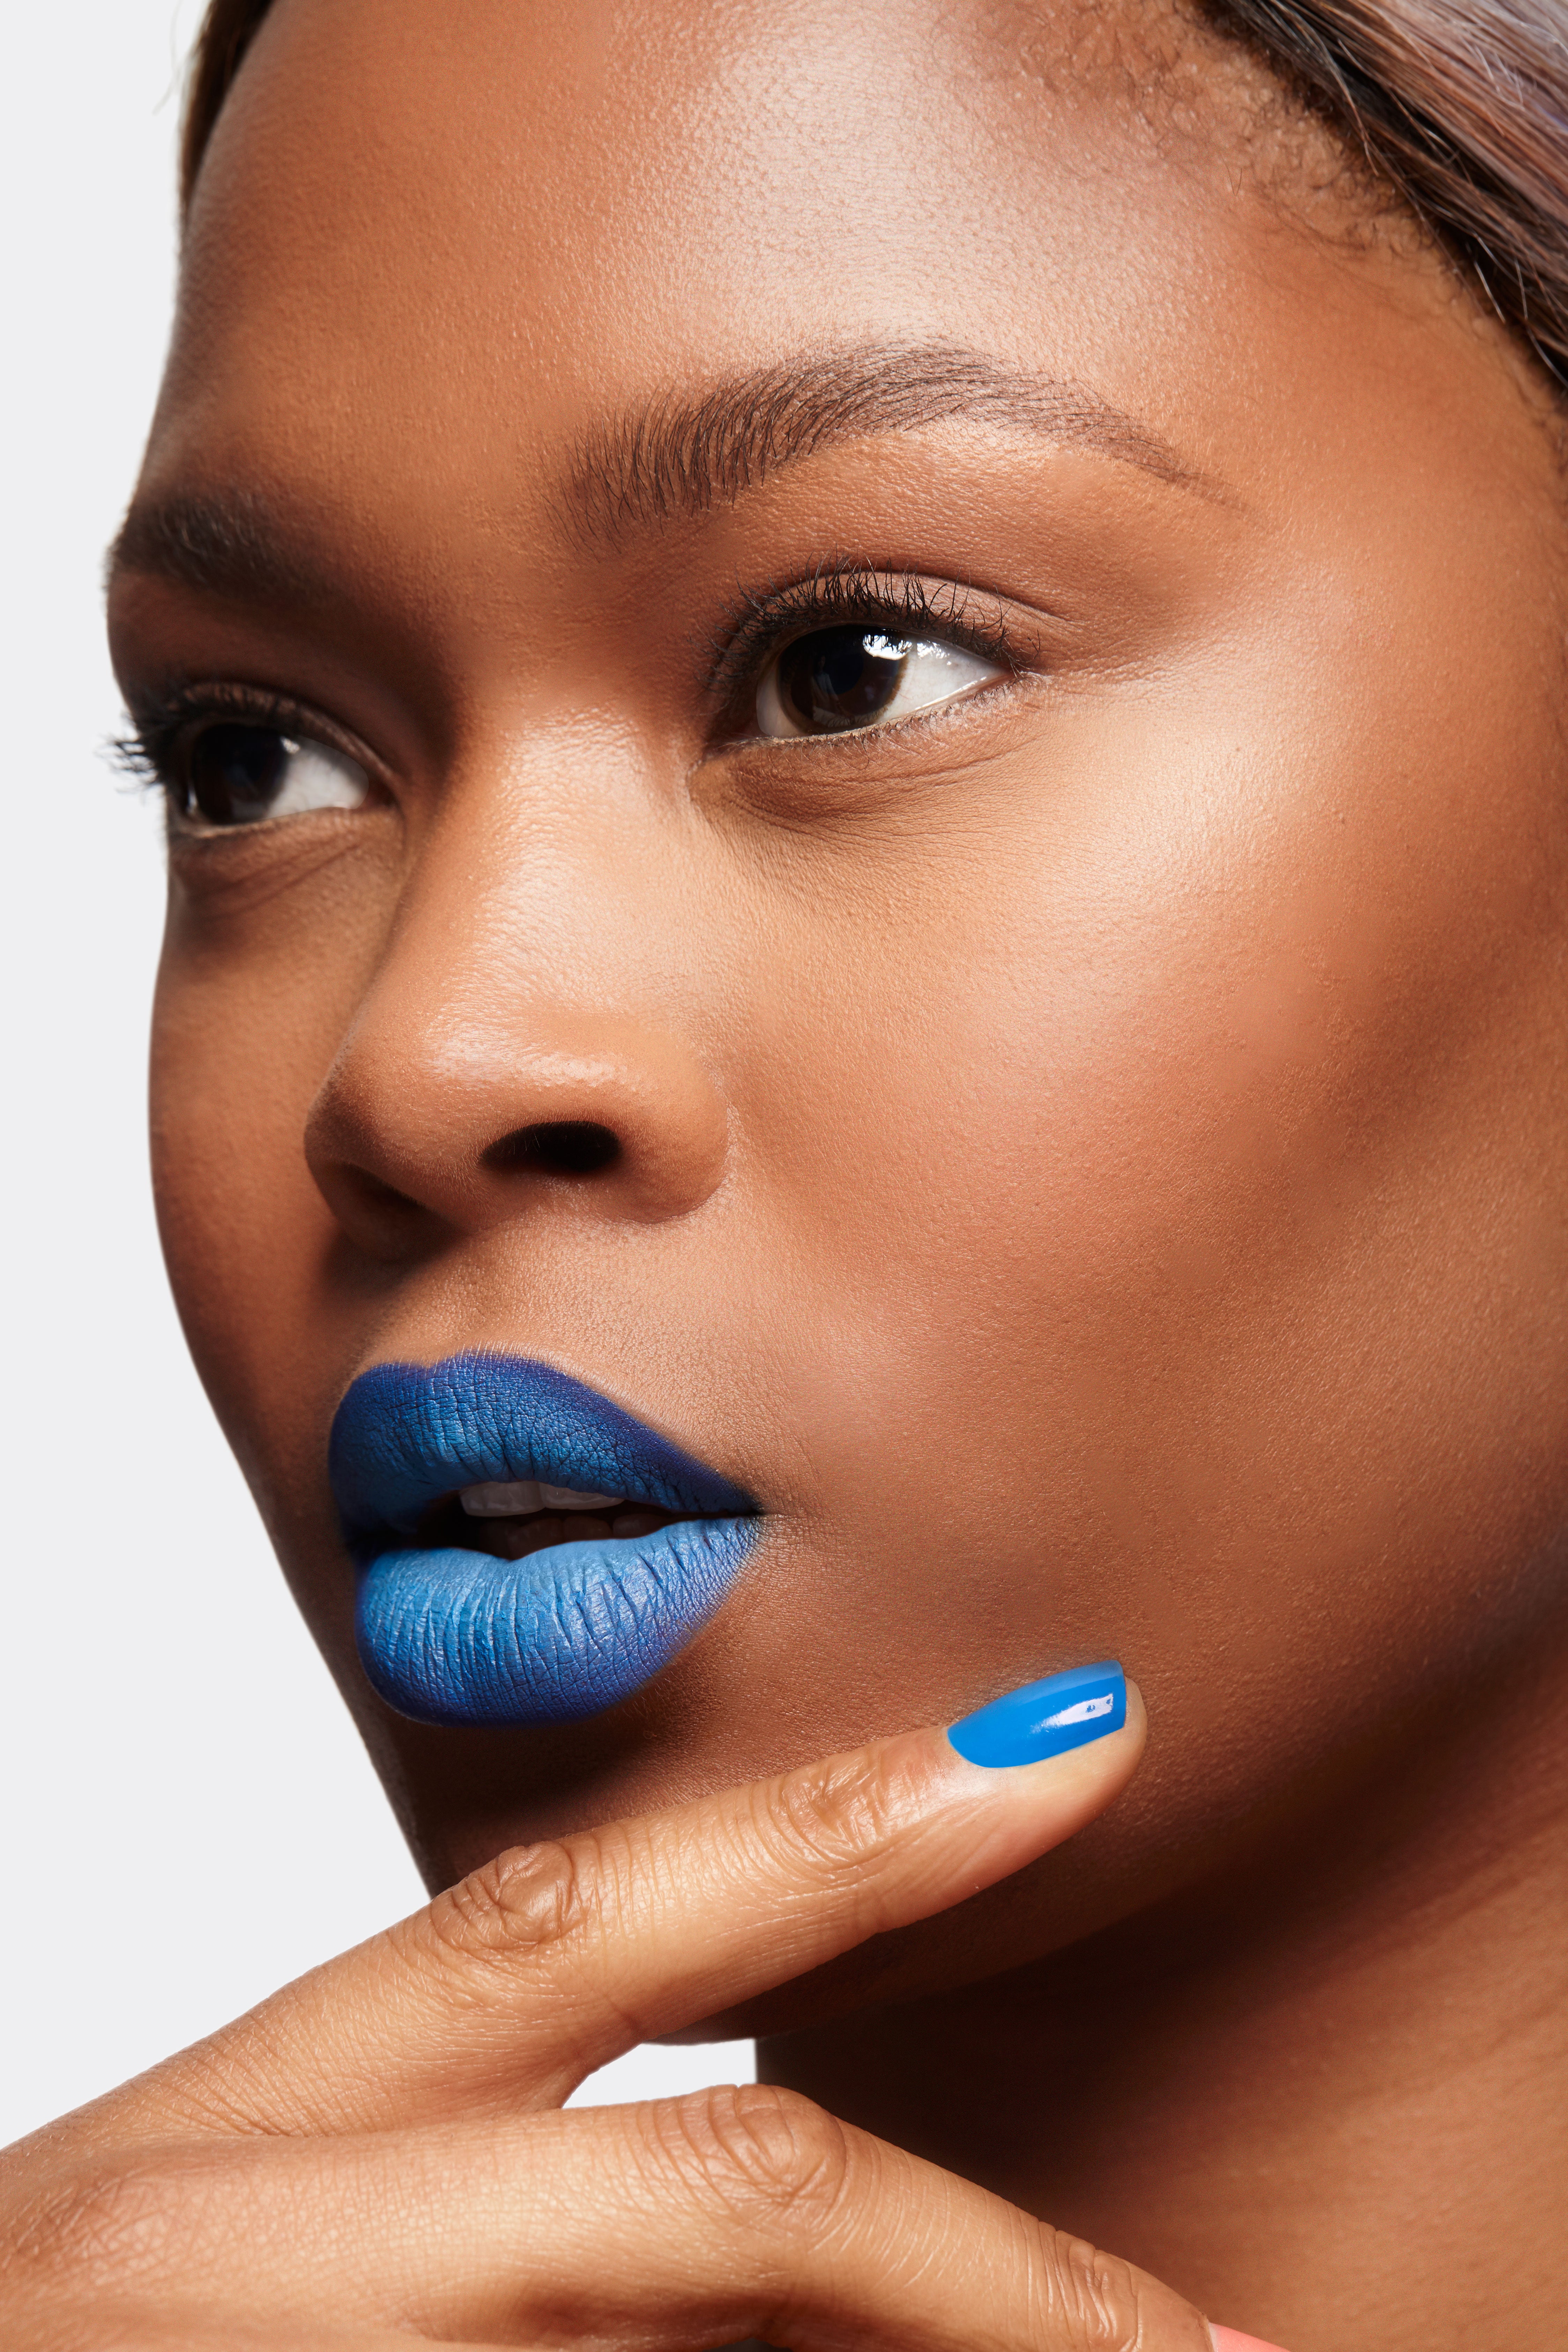 The Run Down: 4 Makeup Trends Everyone Will Be Wearing This Spring
